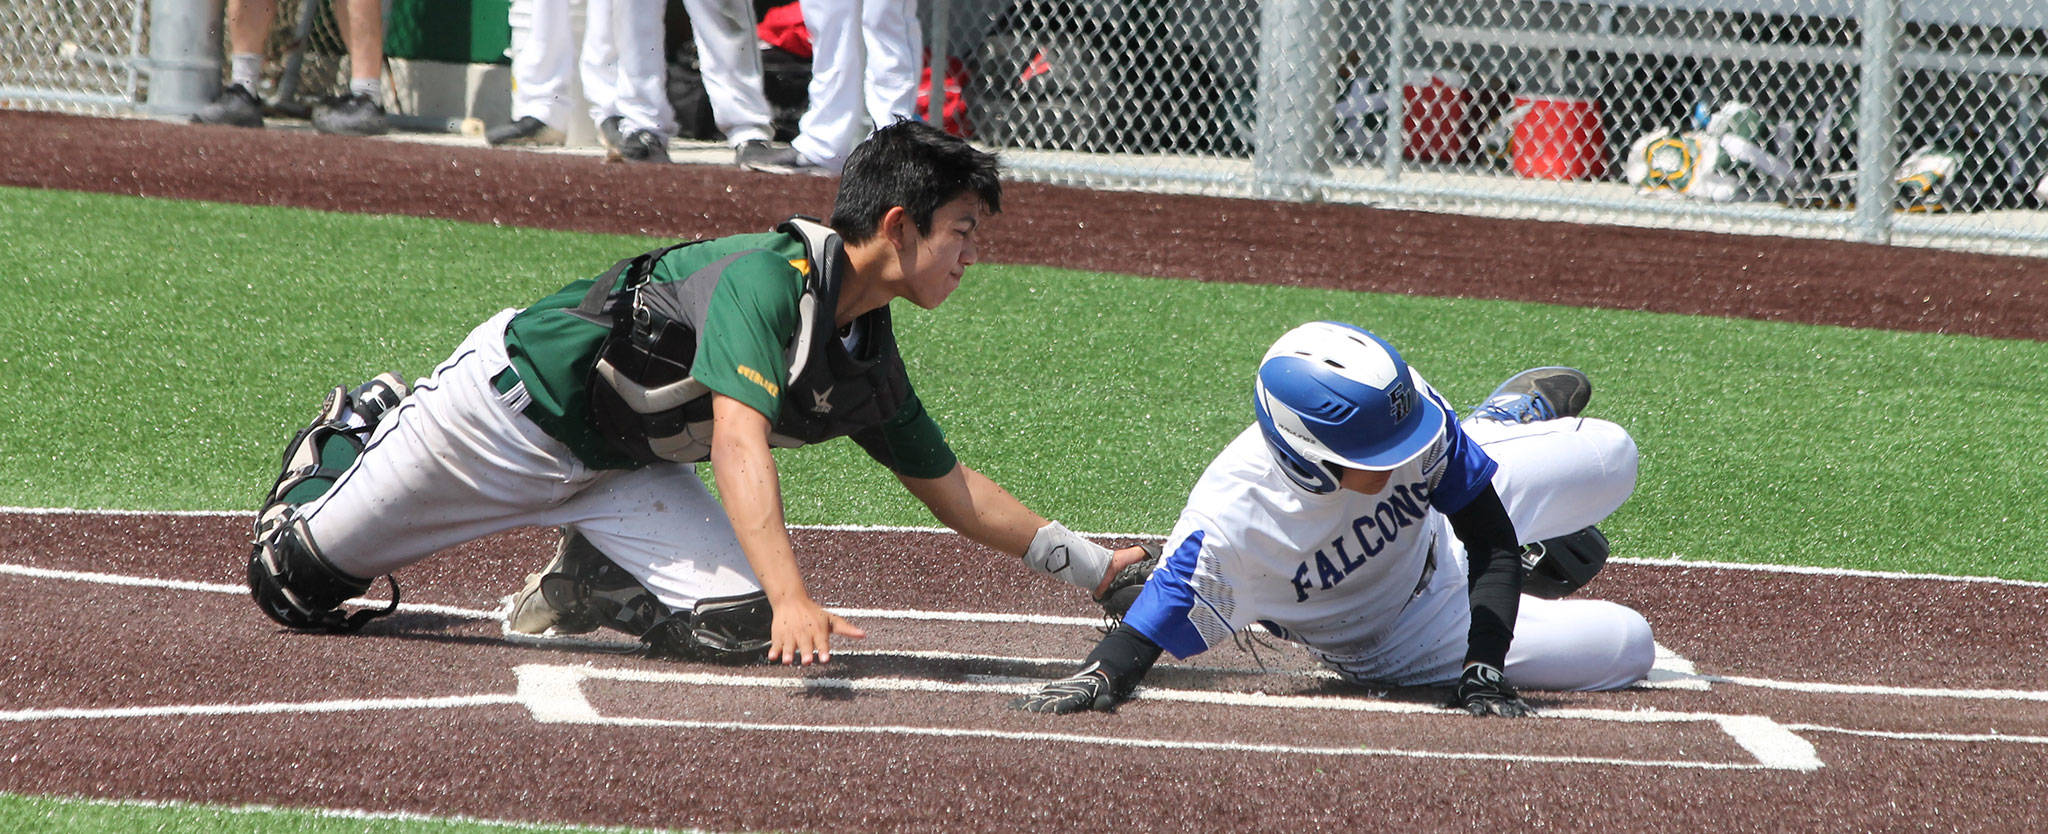 South Whidbey’s Nick Black, right, slides safely across home on a squeeze bunt.(Photo by Jim Waller/South Whidbey Record)